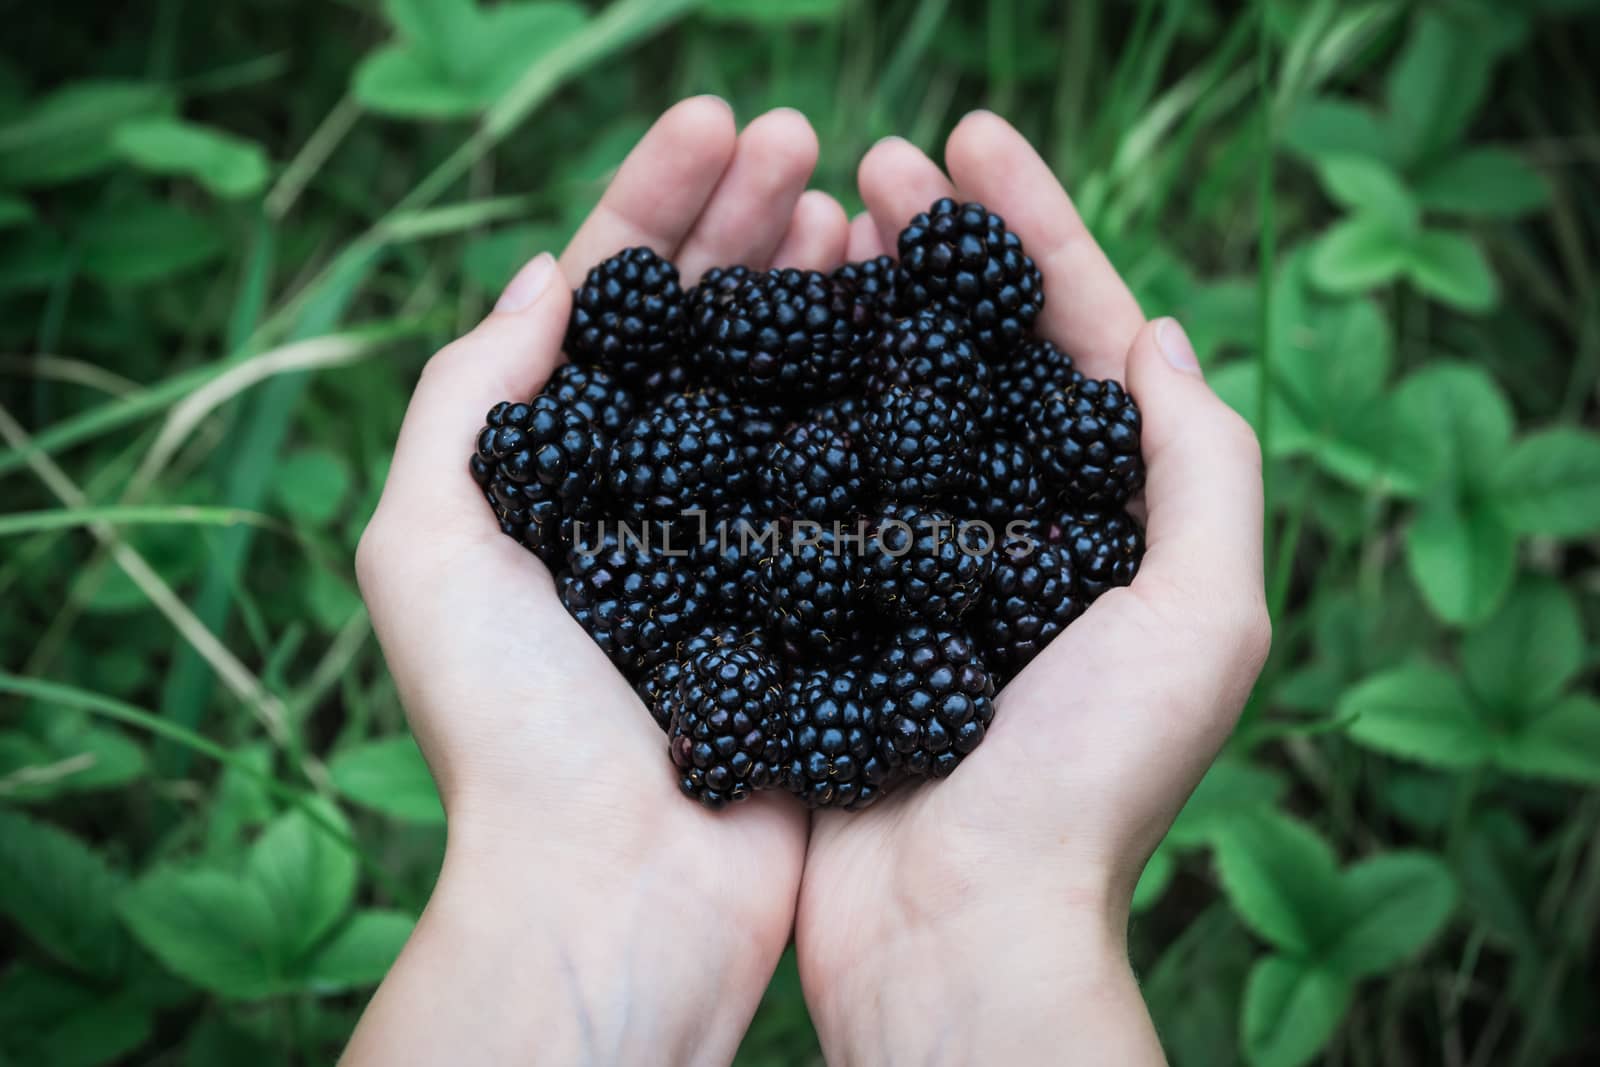 Female hands holding handful of fresh blackberries outdoors in front of green grass background